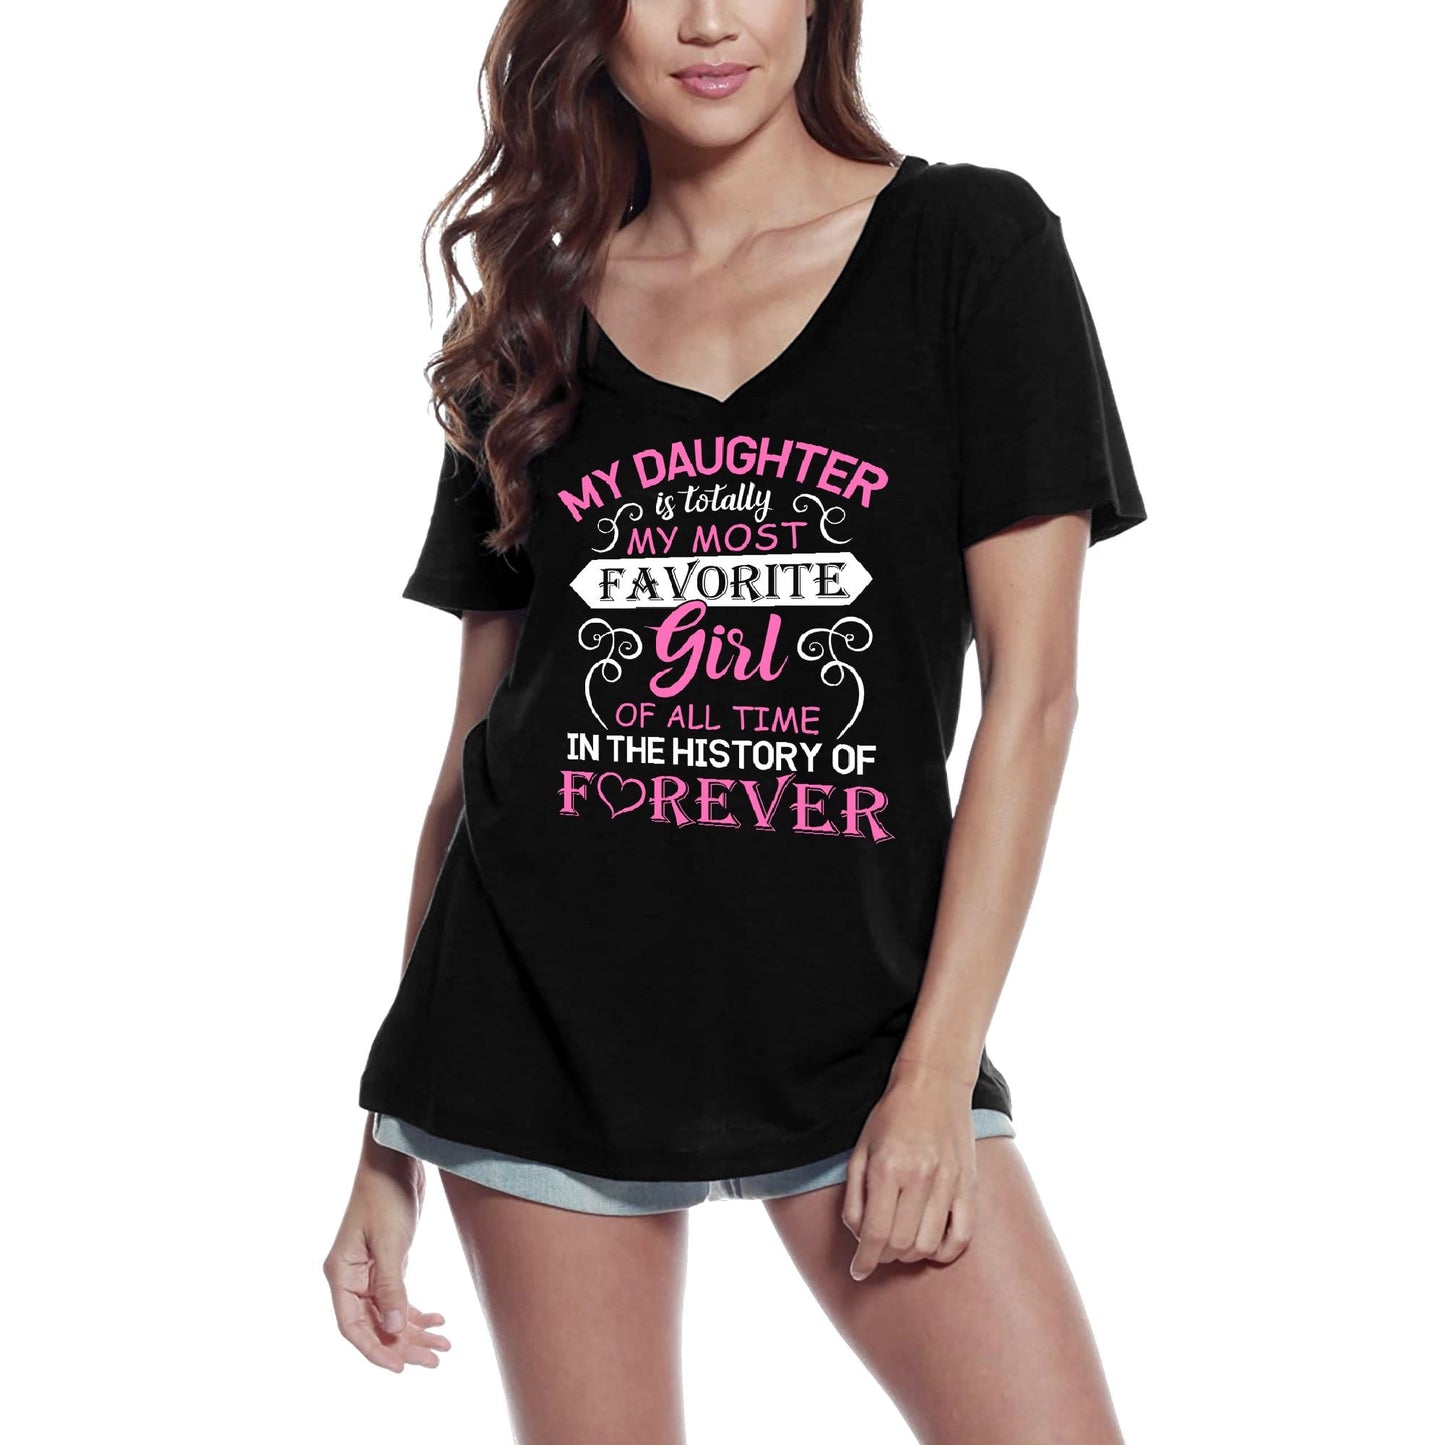 ULTRABASIC Women's T-Shirt My Daughter Is Totally My Most Favortie Girl of All Time - Mom Tee Shirt